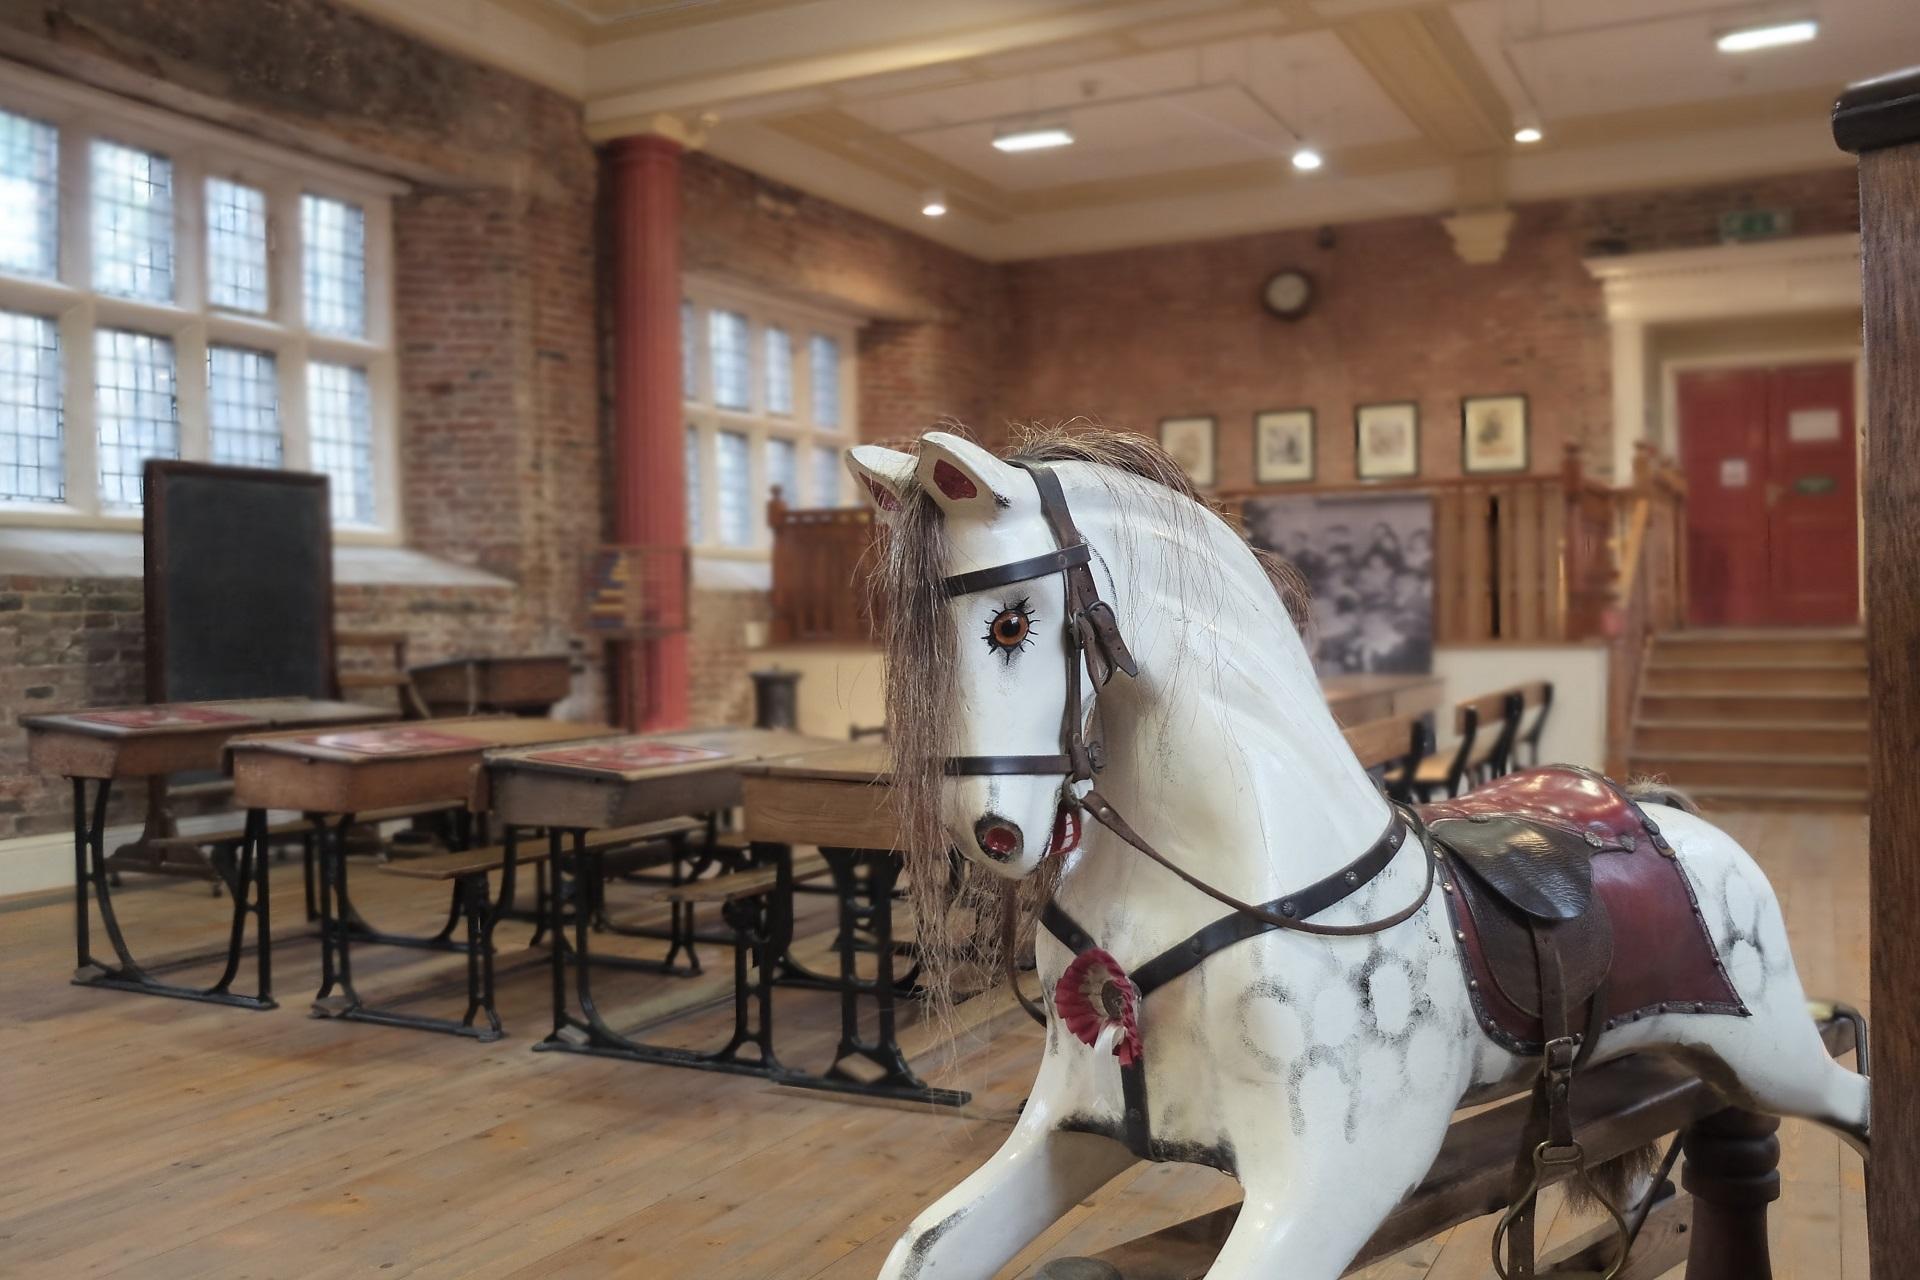 A rocking horse in a Victorian schoolroom setting in a museum.